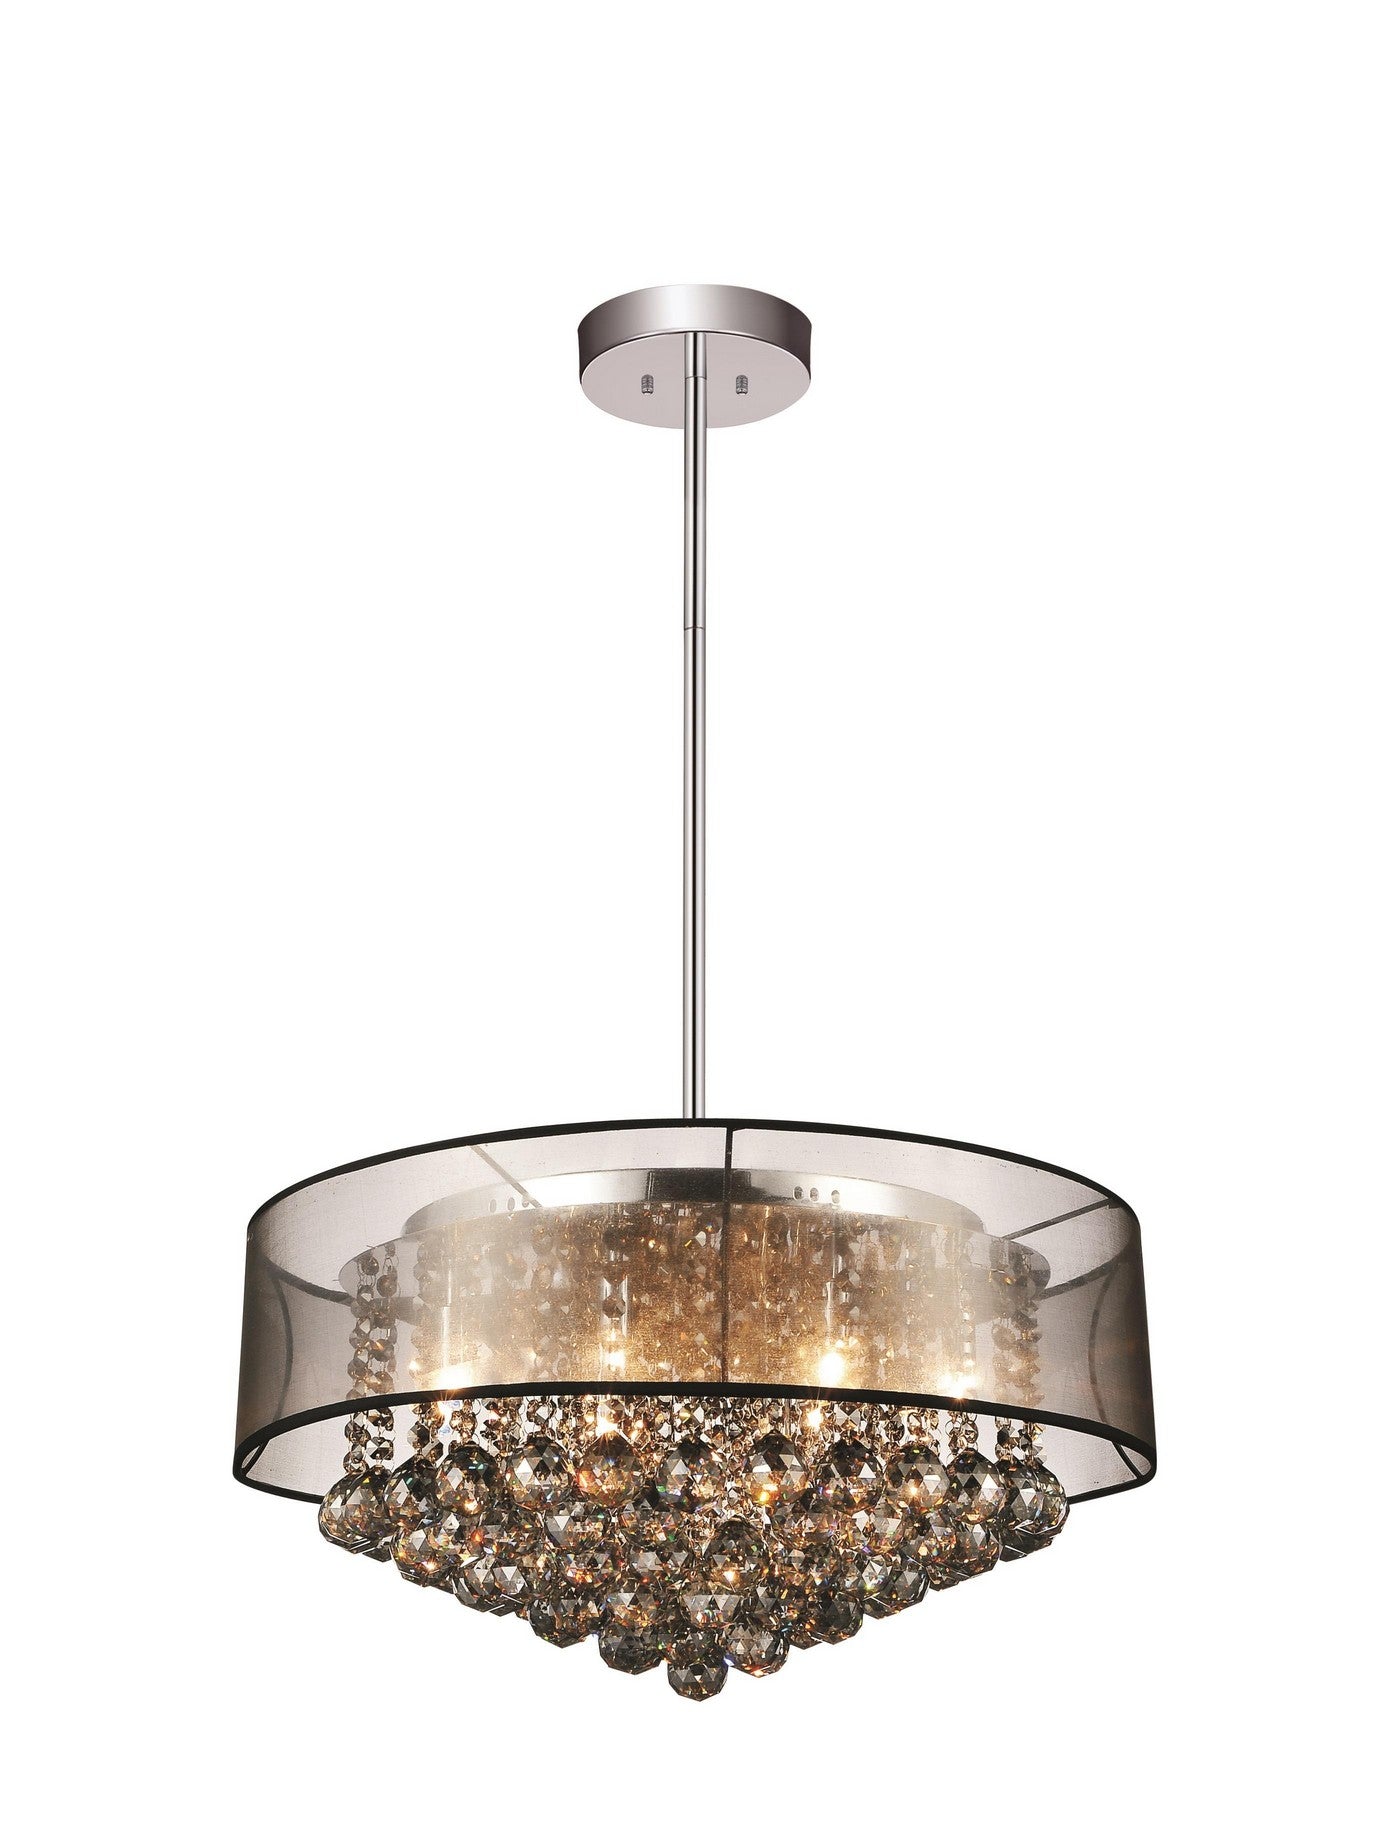 9 LIGHT DRUM SHADE CHANDELIER WITH CHROME FINISH - Dreamart Gallery